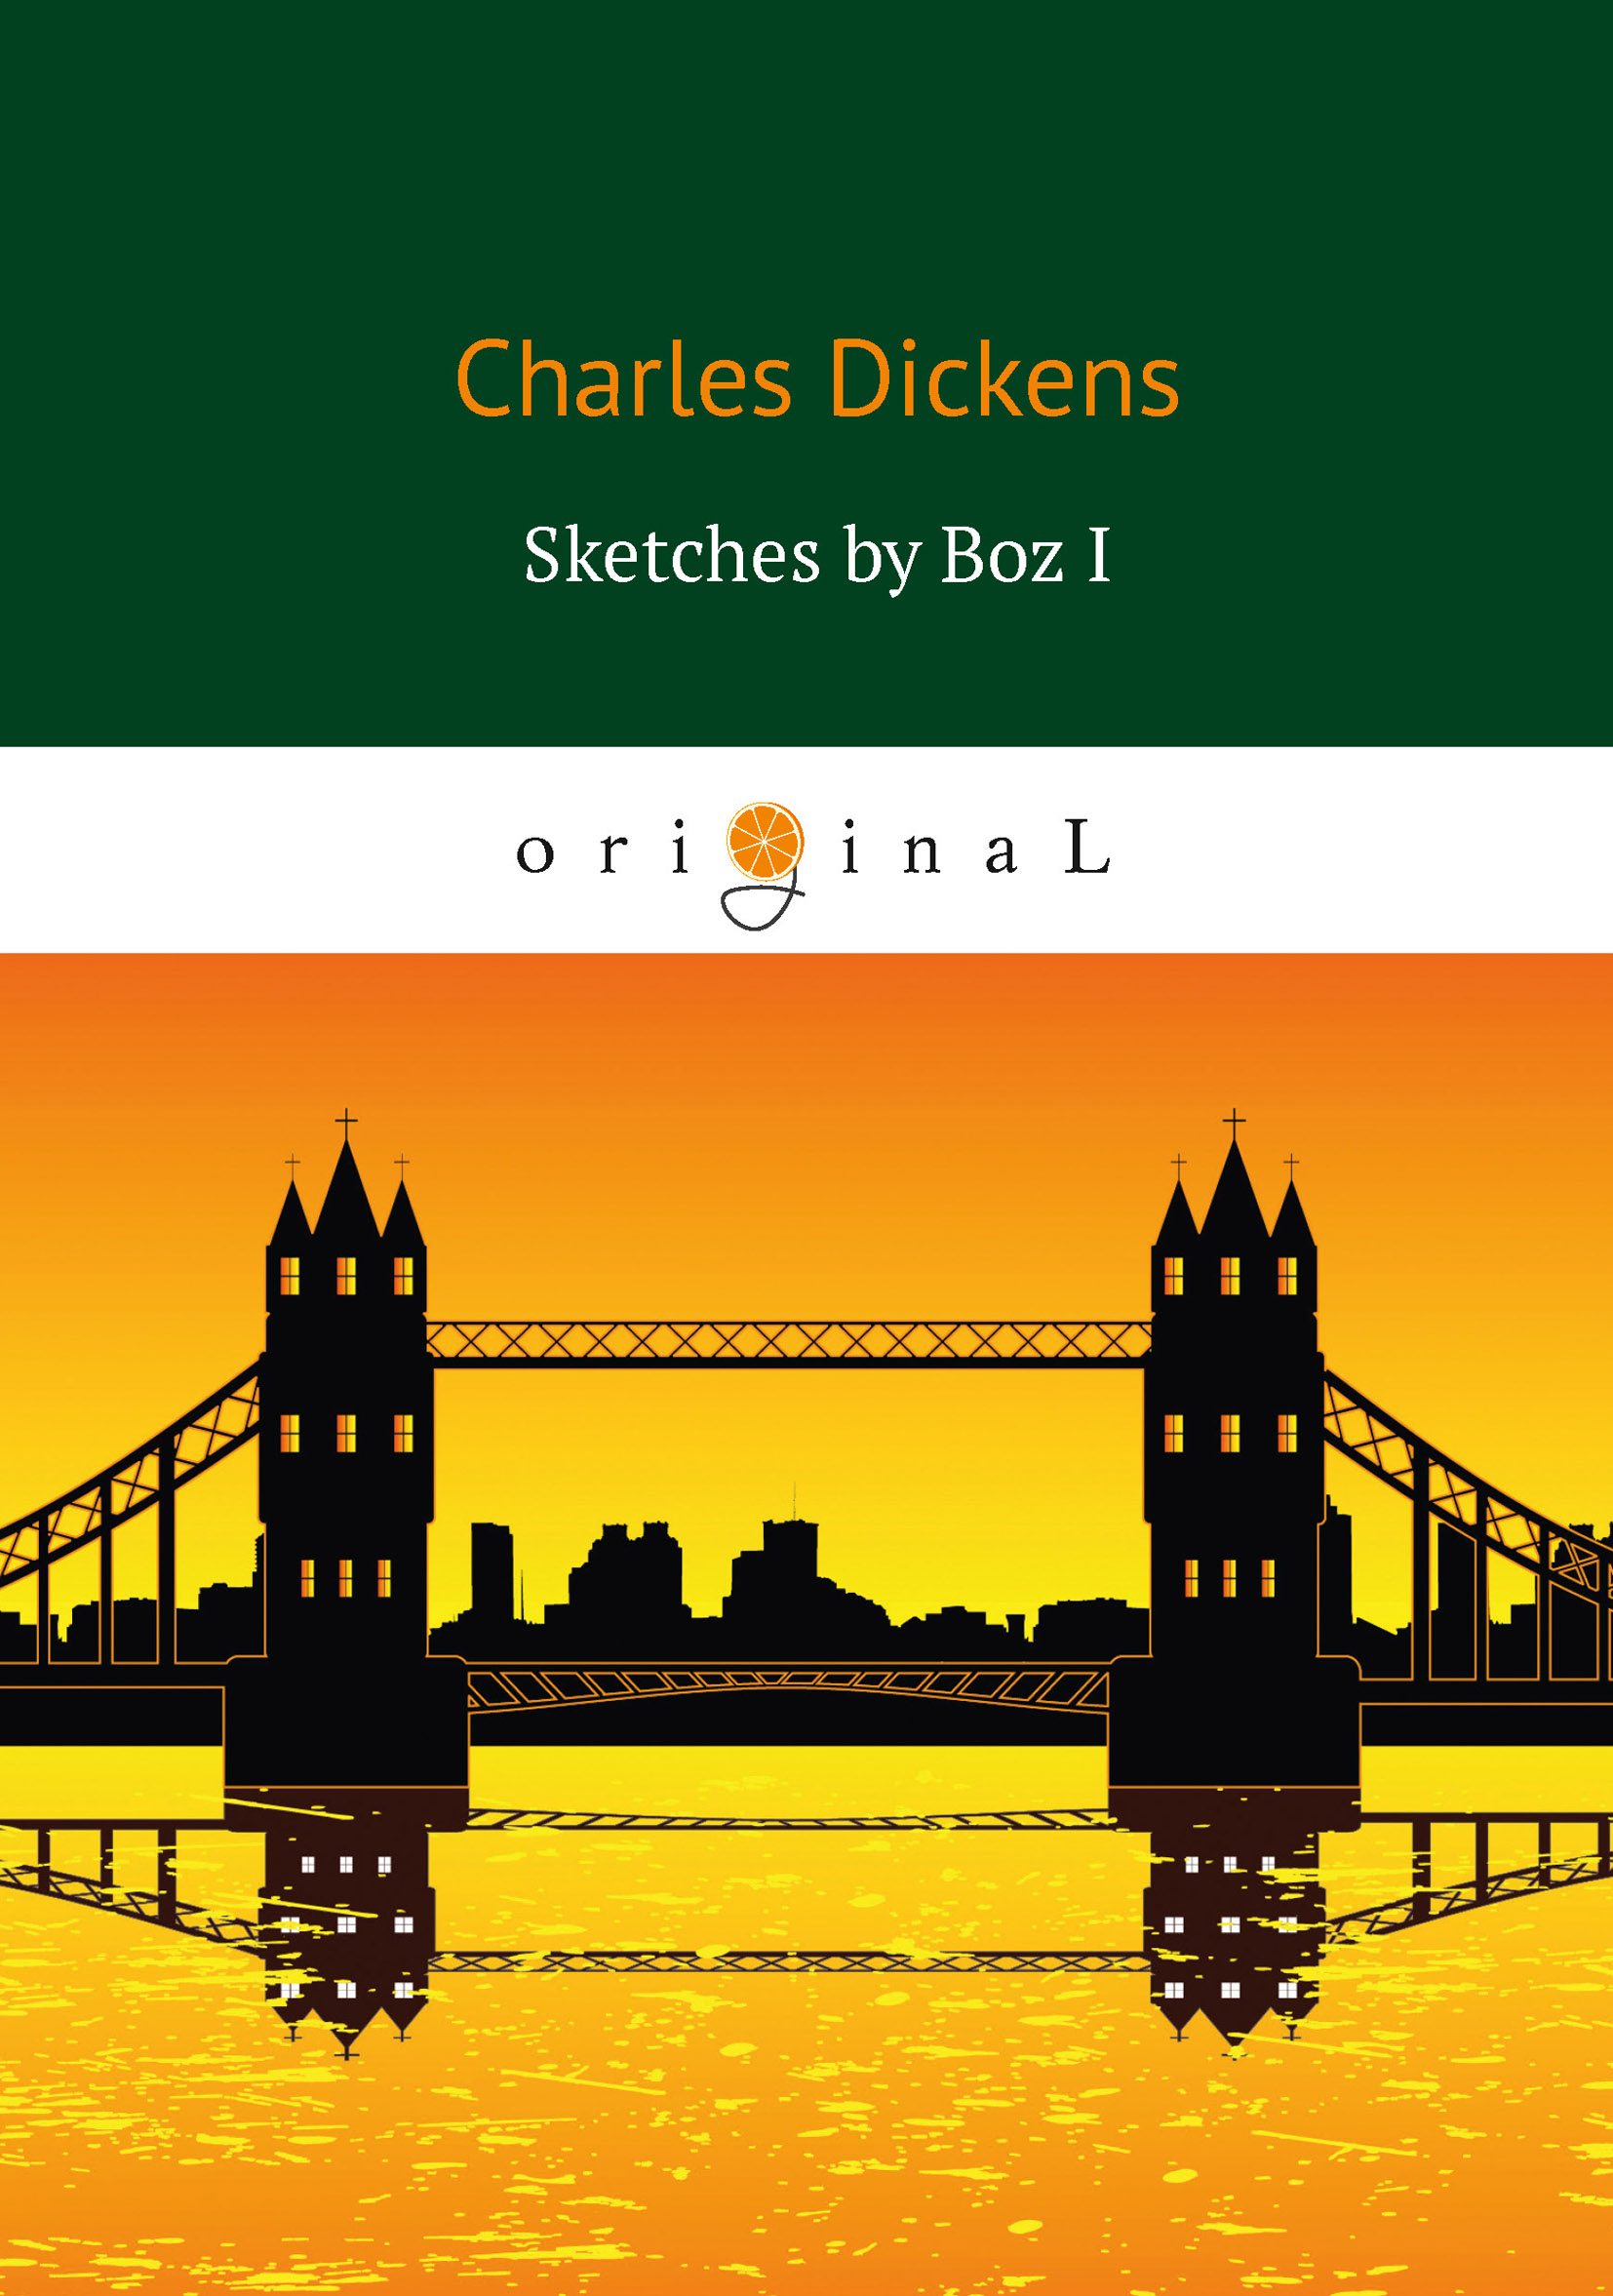 Sketches by Boz I. Dickens C.